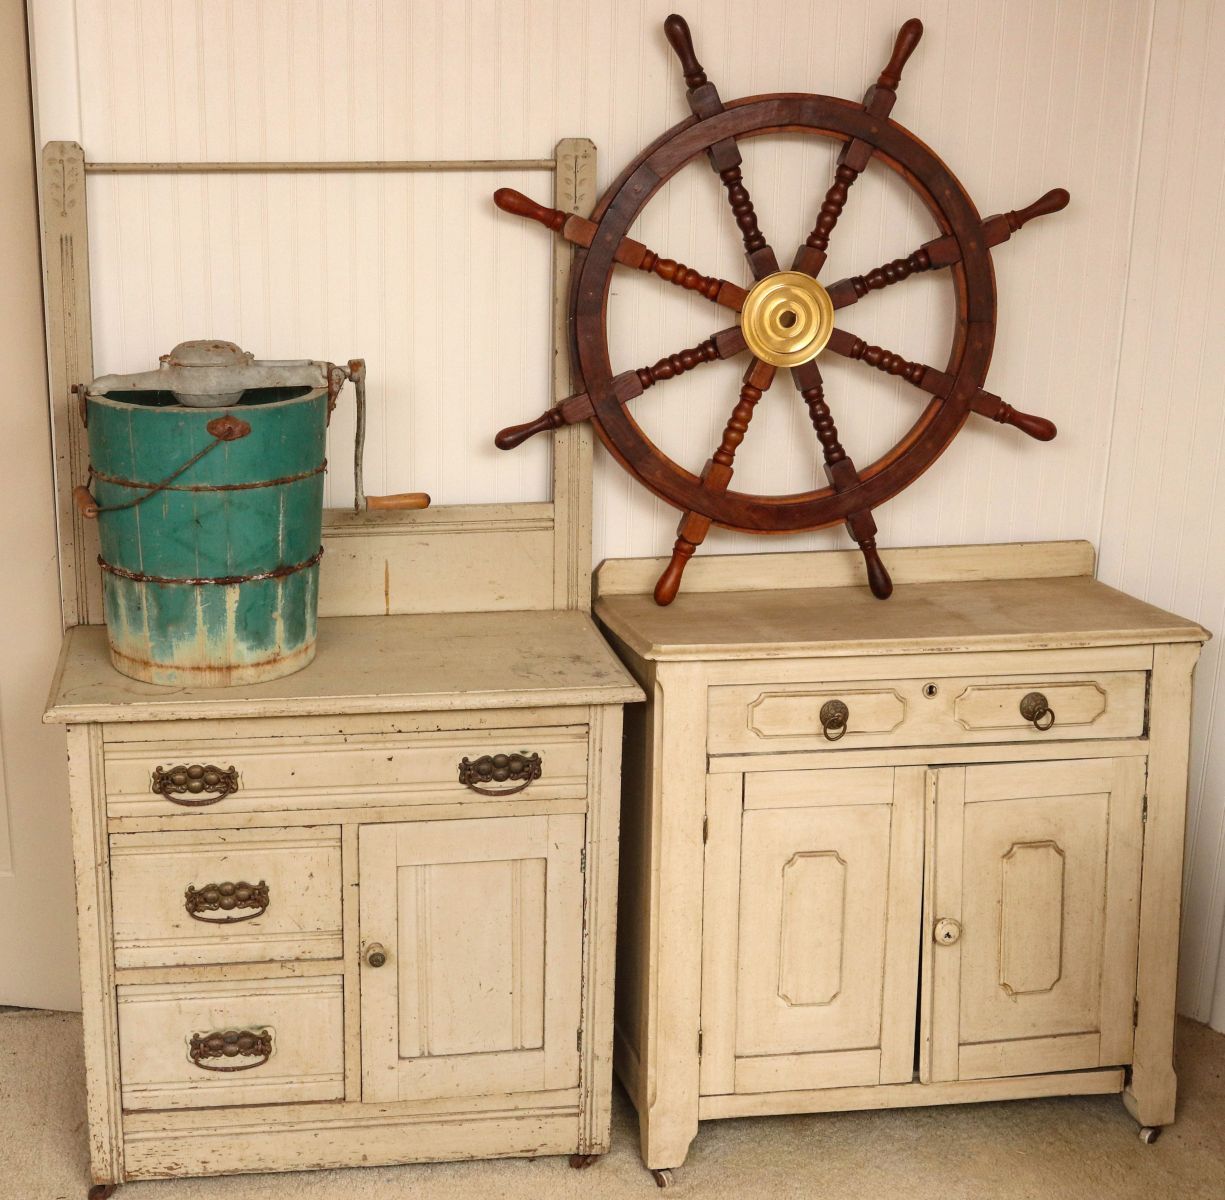 PAINTED FURNITURE, FAUX SHIP'S WHEEL AND MORE